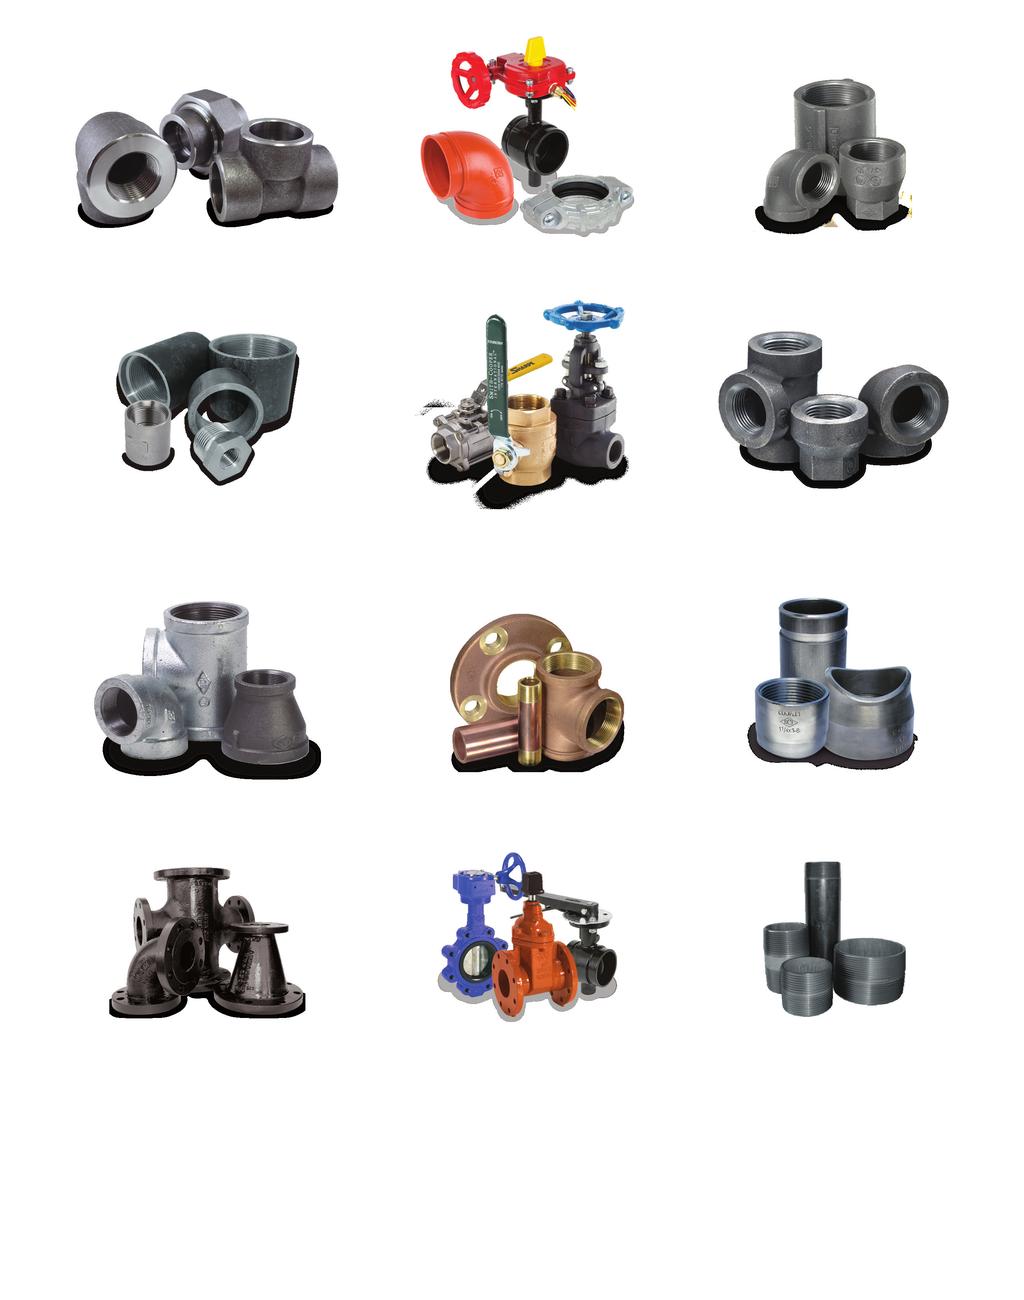 Forged Steel Fittings 2000#, 3000#, 6000# Thrd & S/W 1/8 4 Merchant Steel Coupling & Fittings Full, Half, API Style